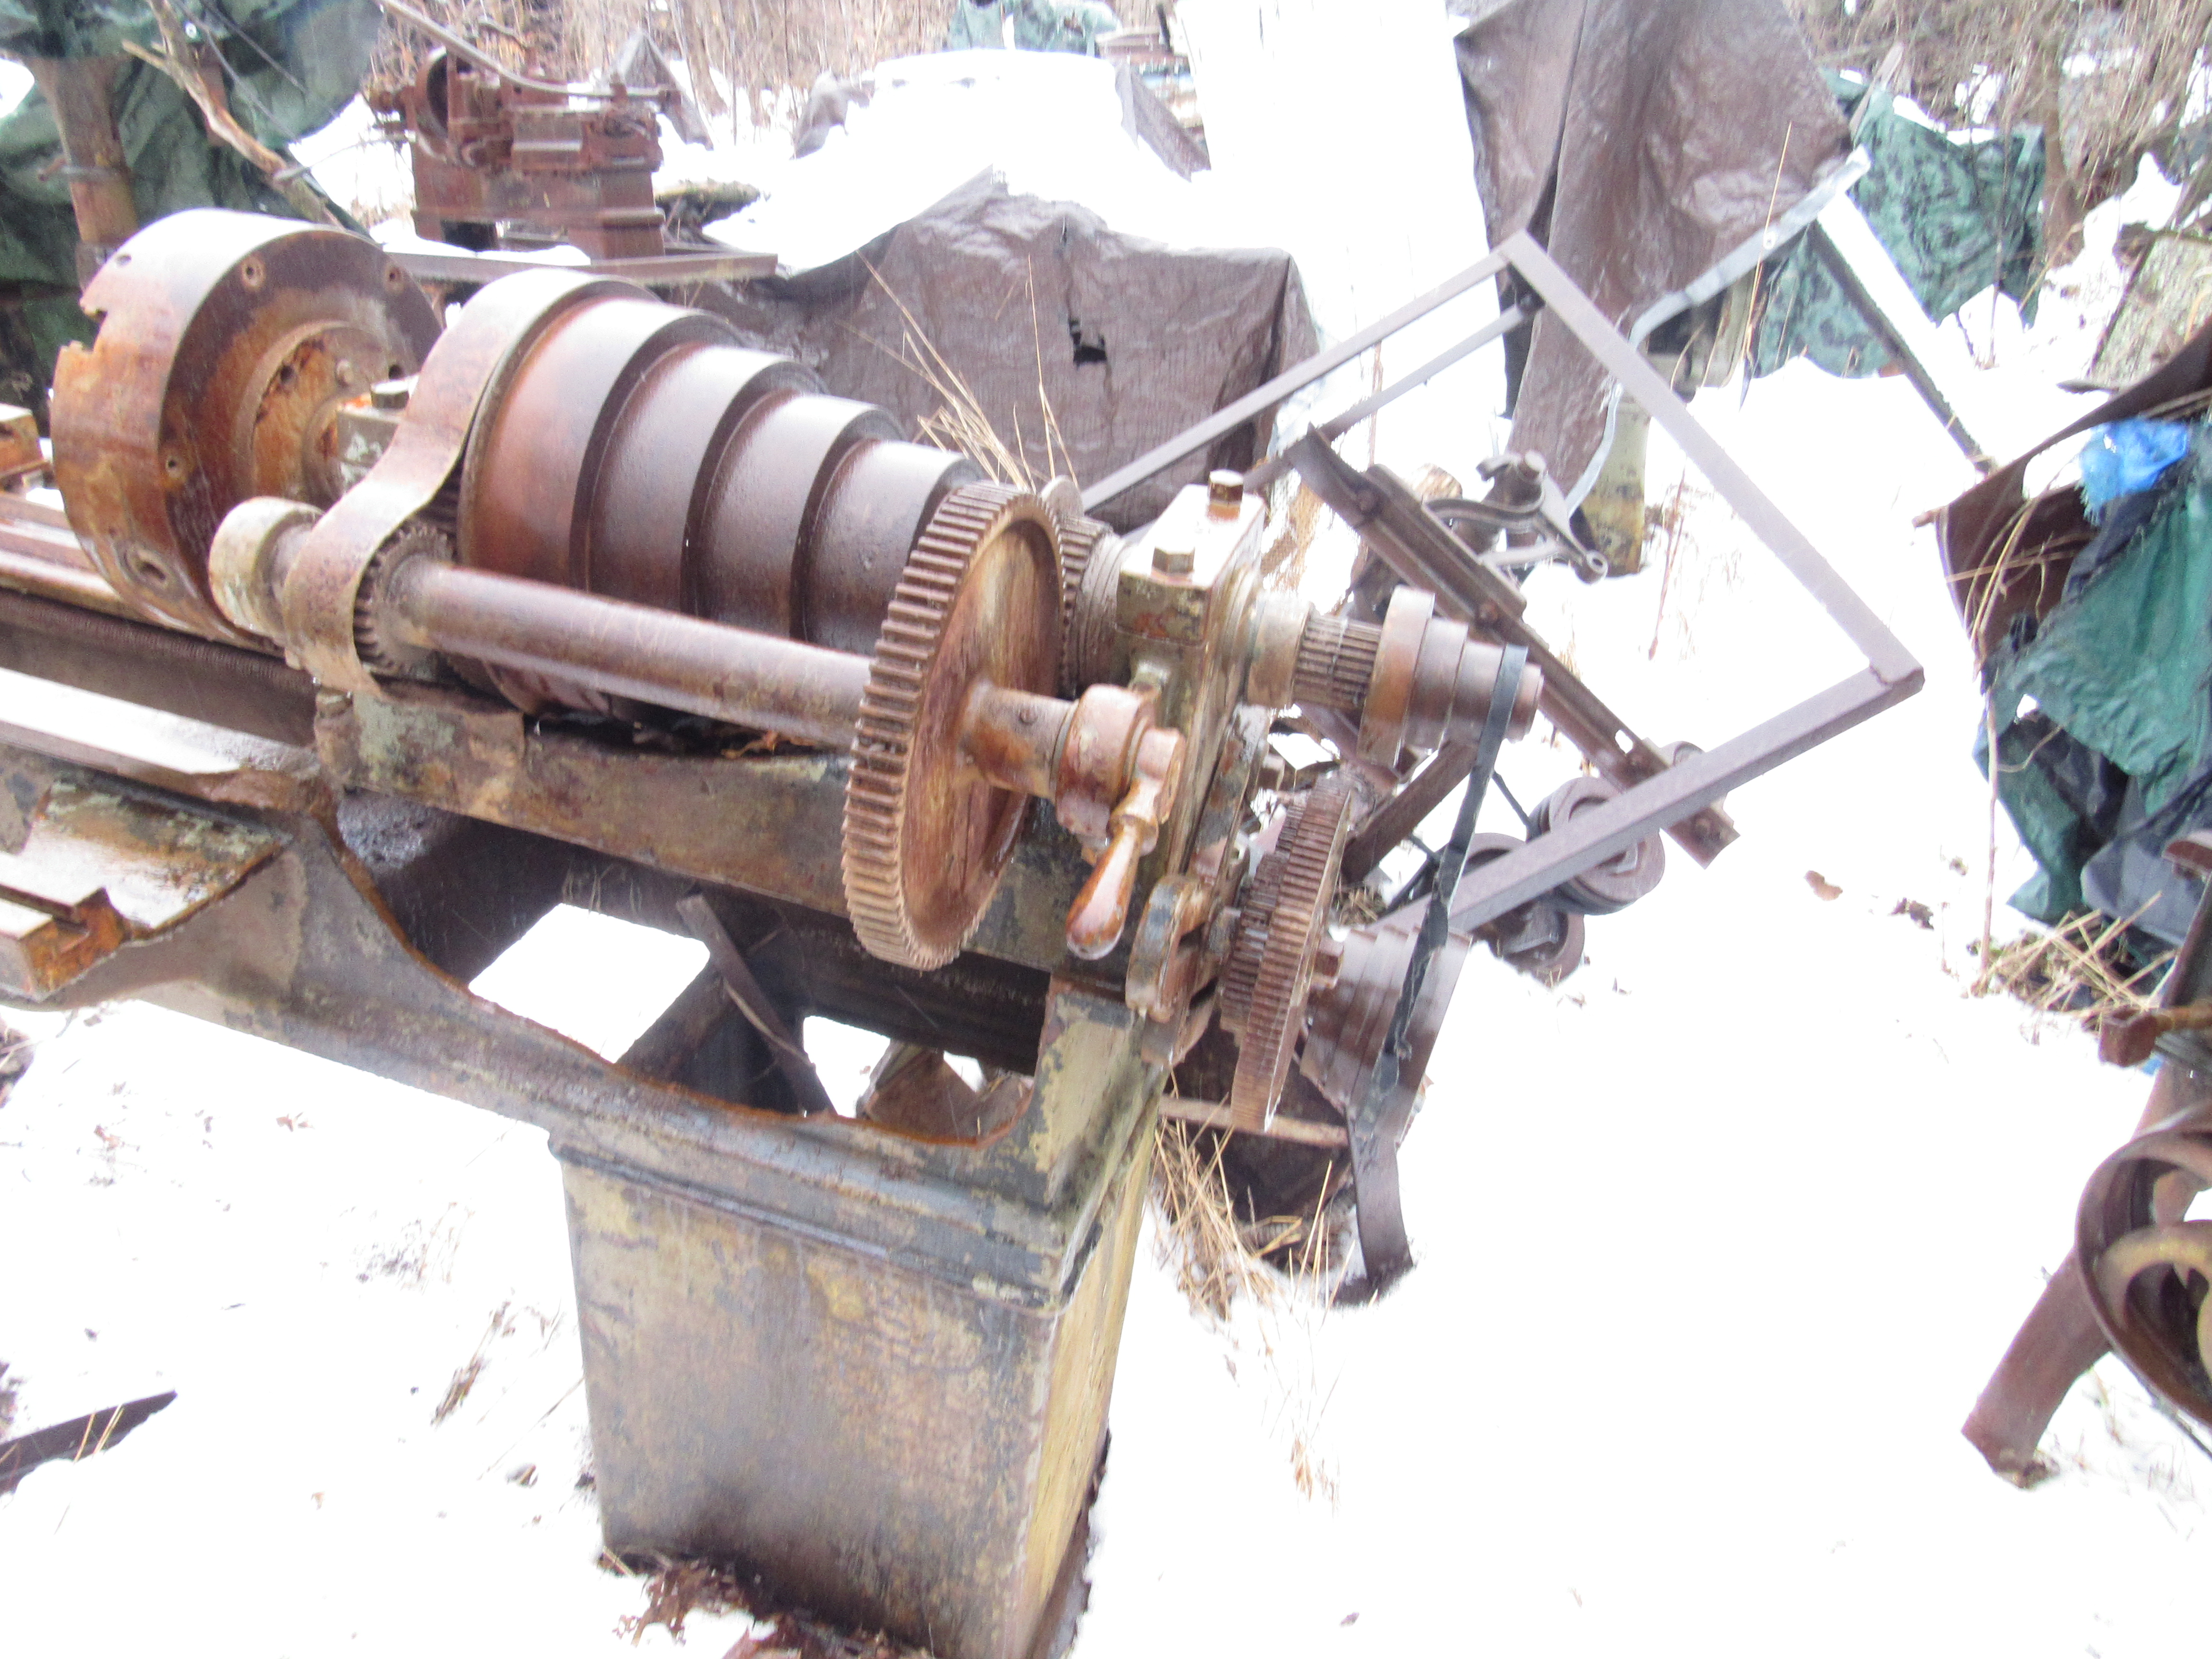 http://antiquemachinery.com/images-2020/IMG_0713-Antique-Old-Vintage-Machines-I-Bought-are-home-safe--Lodge-and-Davis-Lathe-from-Penn-1887-1893-Metal-lathe-damage-side-piece-broken-under-headstock-.JPG